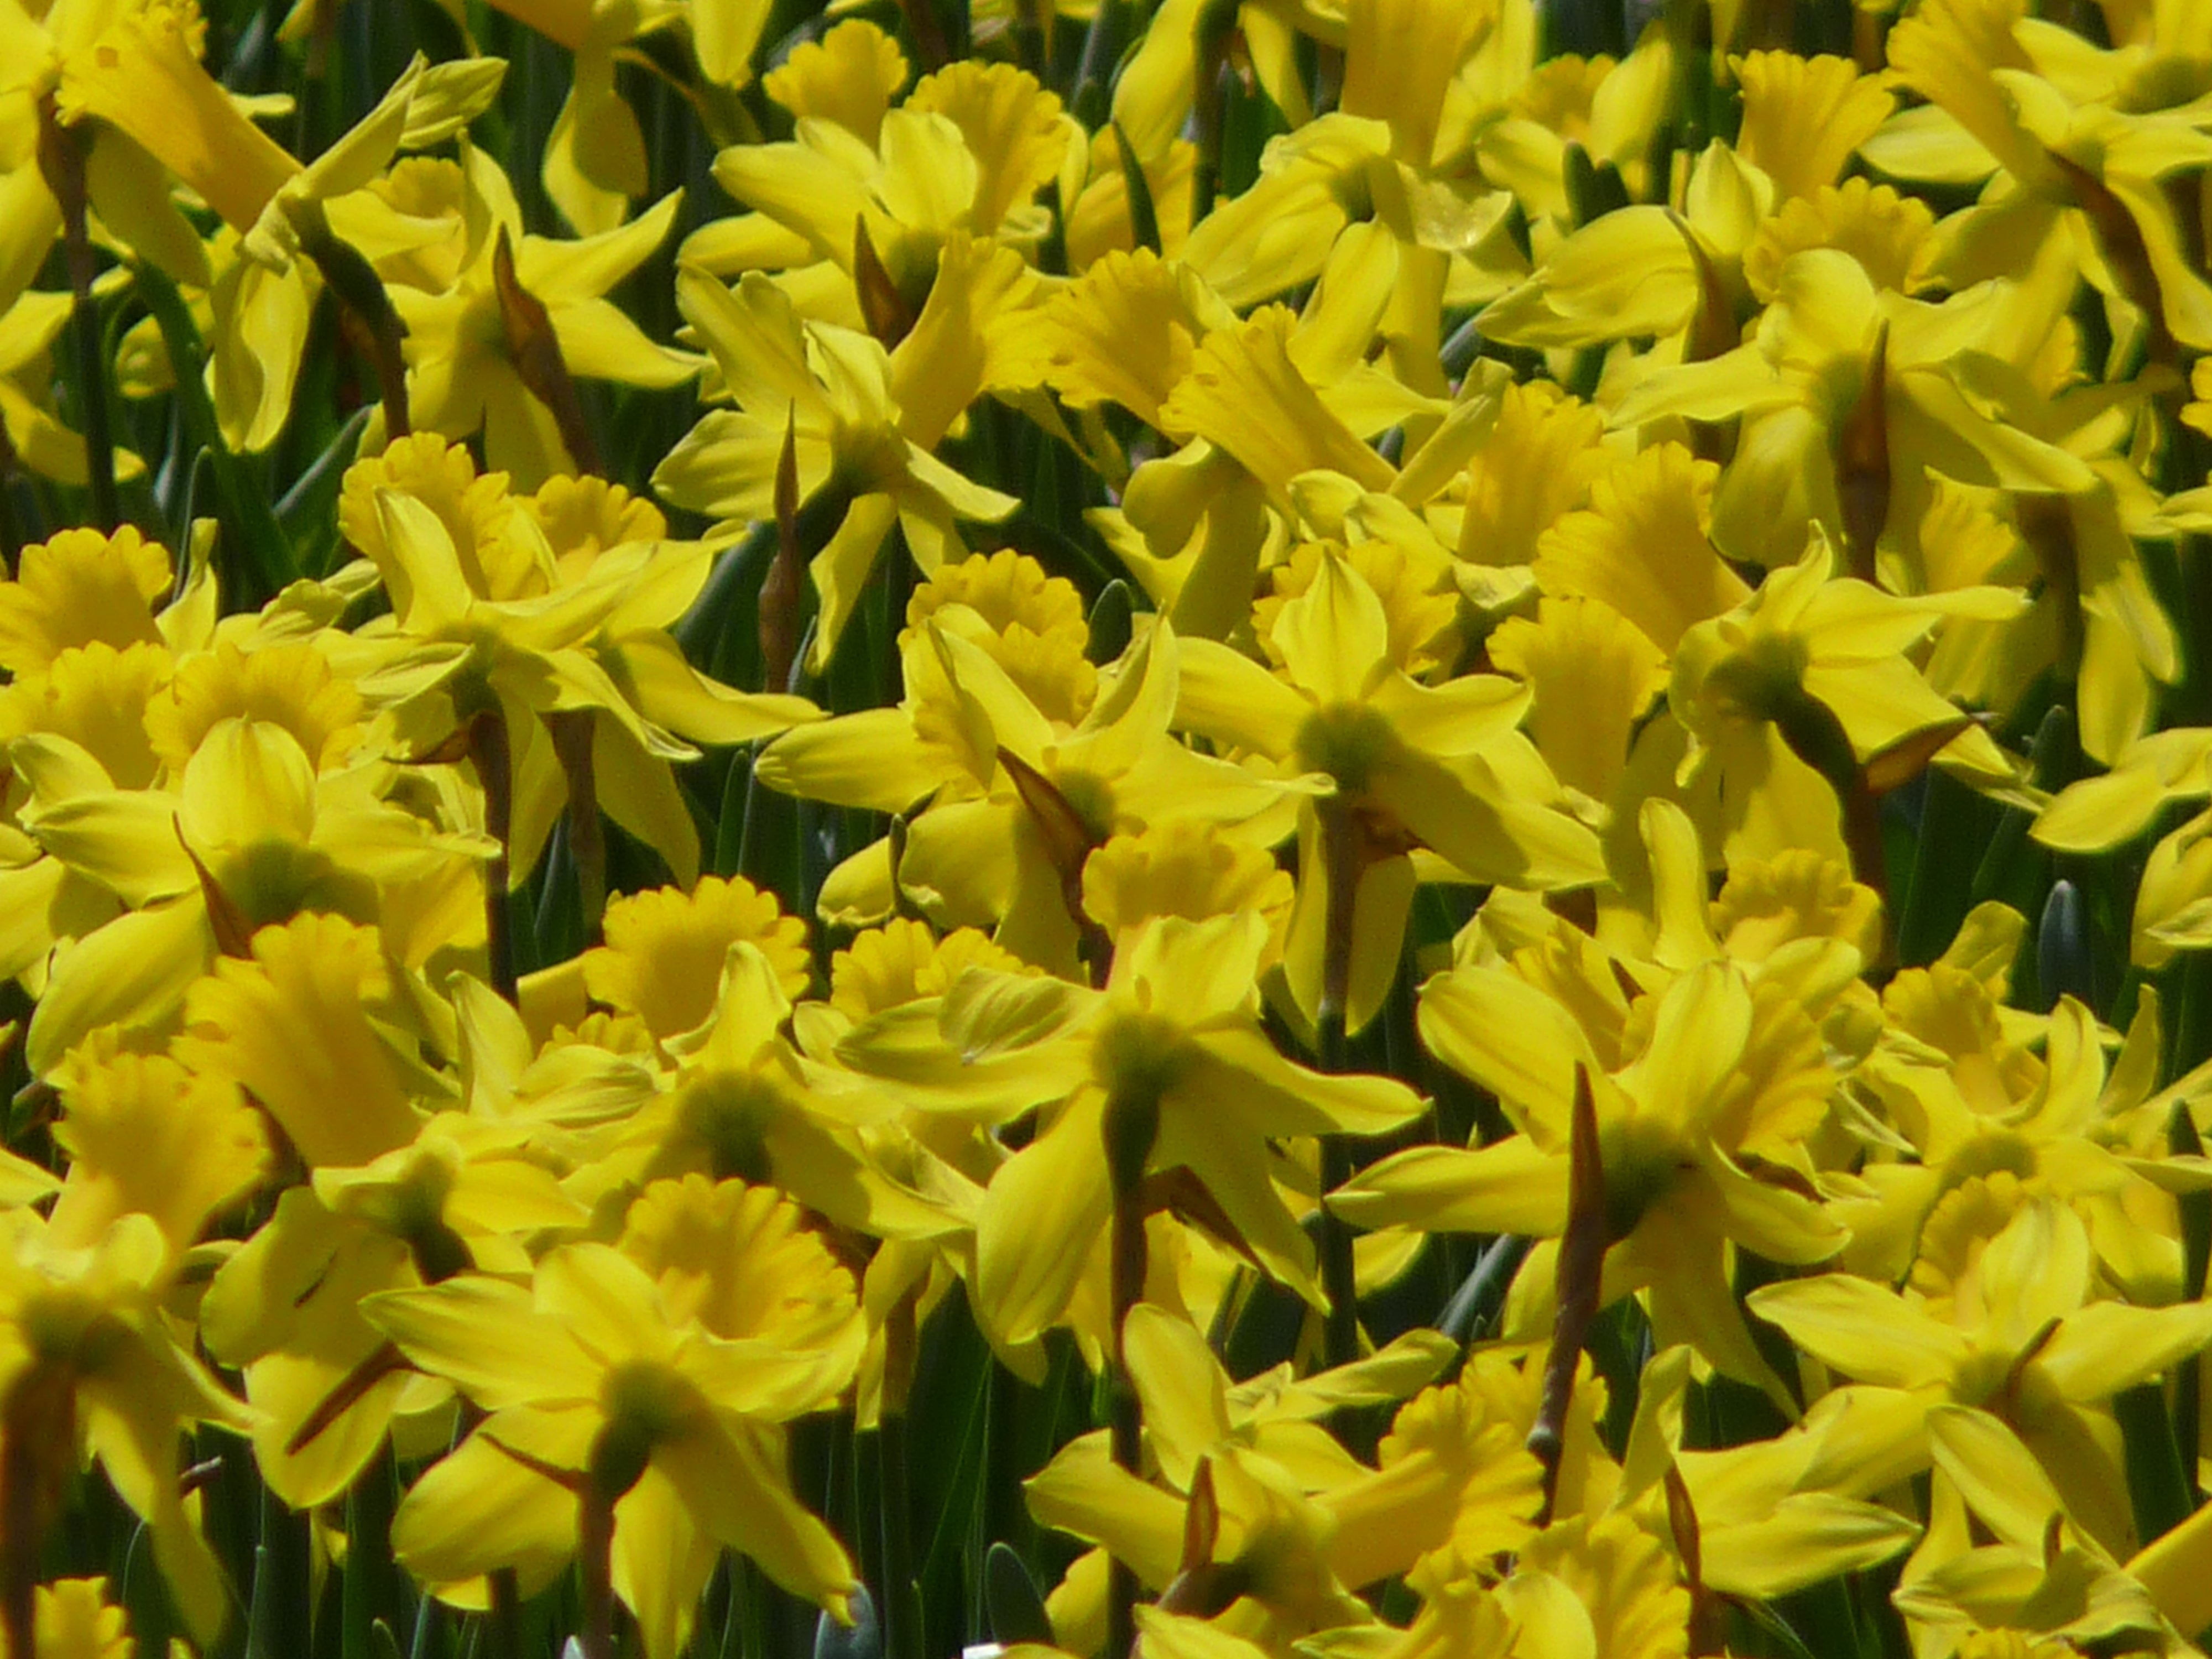 bunch of yellow petaled flowers